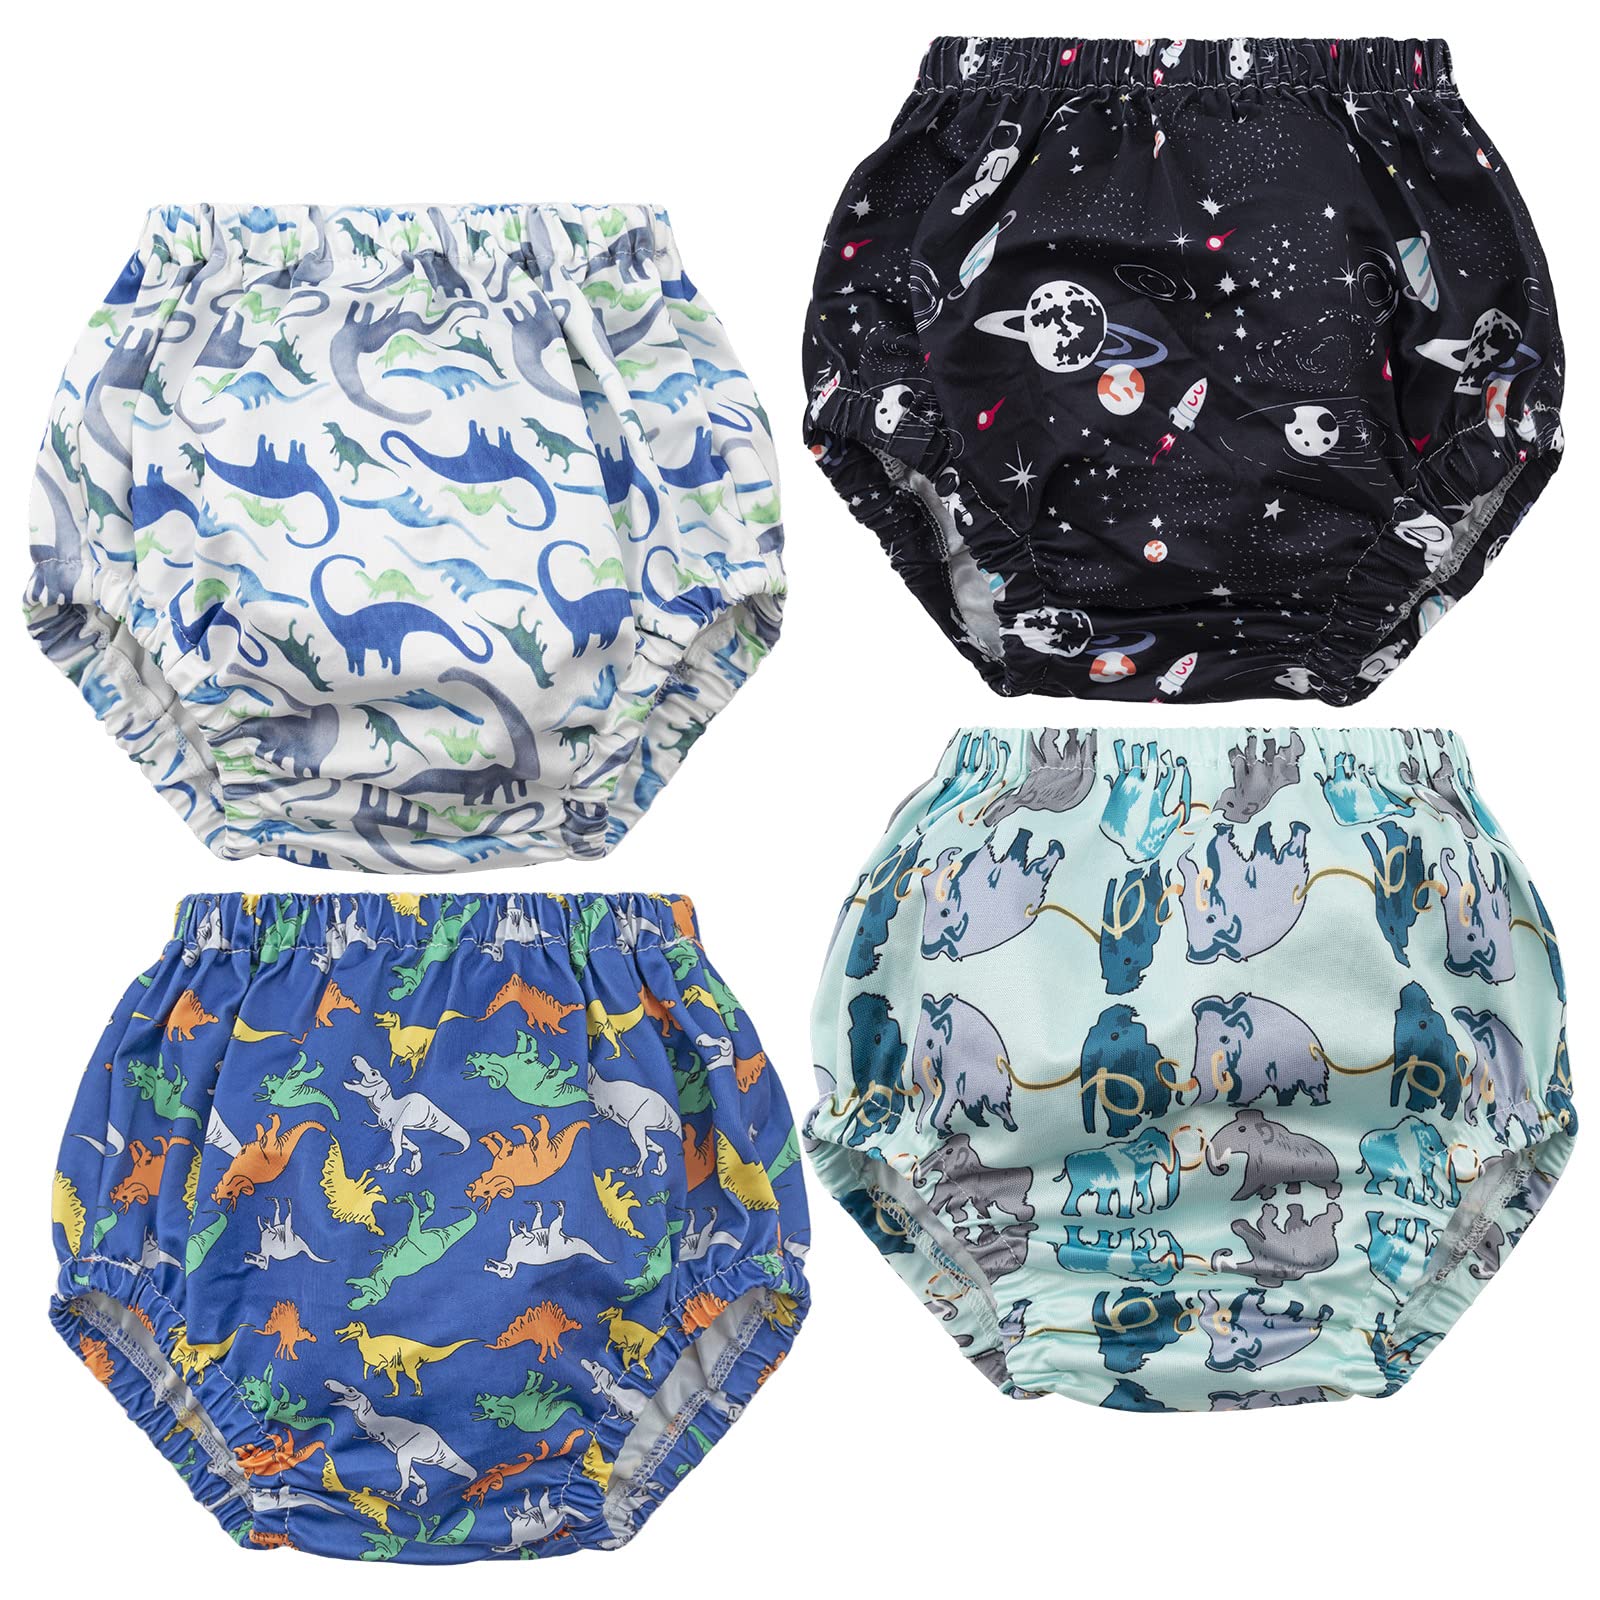 Kwumsy Potty Training Underwear for Boys, Toddler Rubber Swim Diaper cover, Plastic Pants for Toddlers Training Pants, Training 